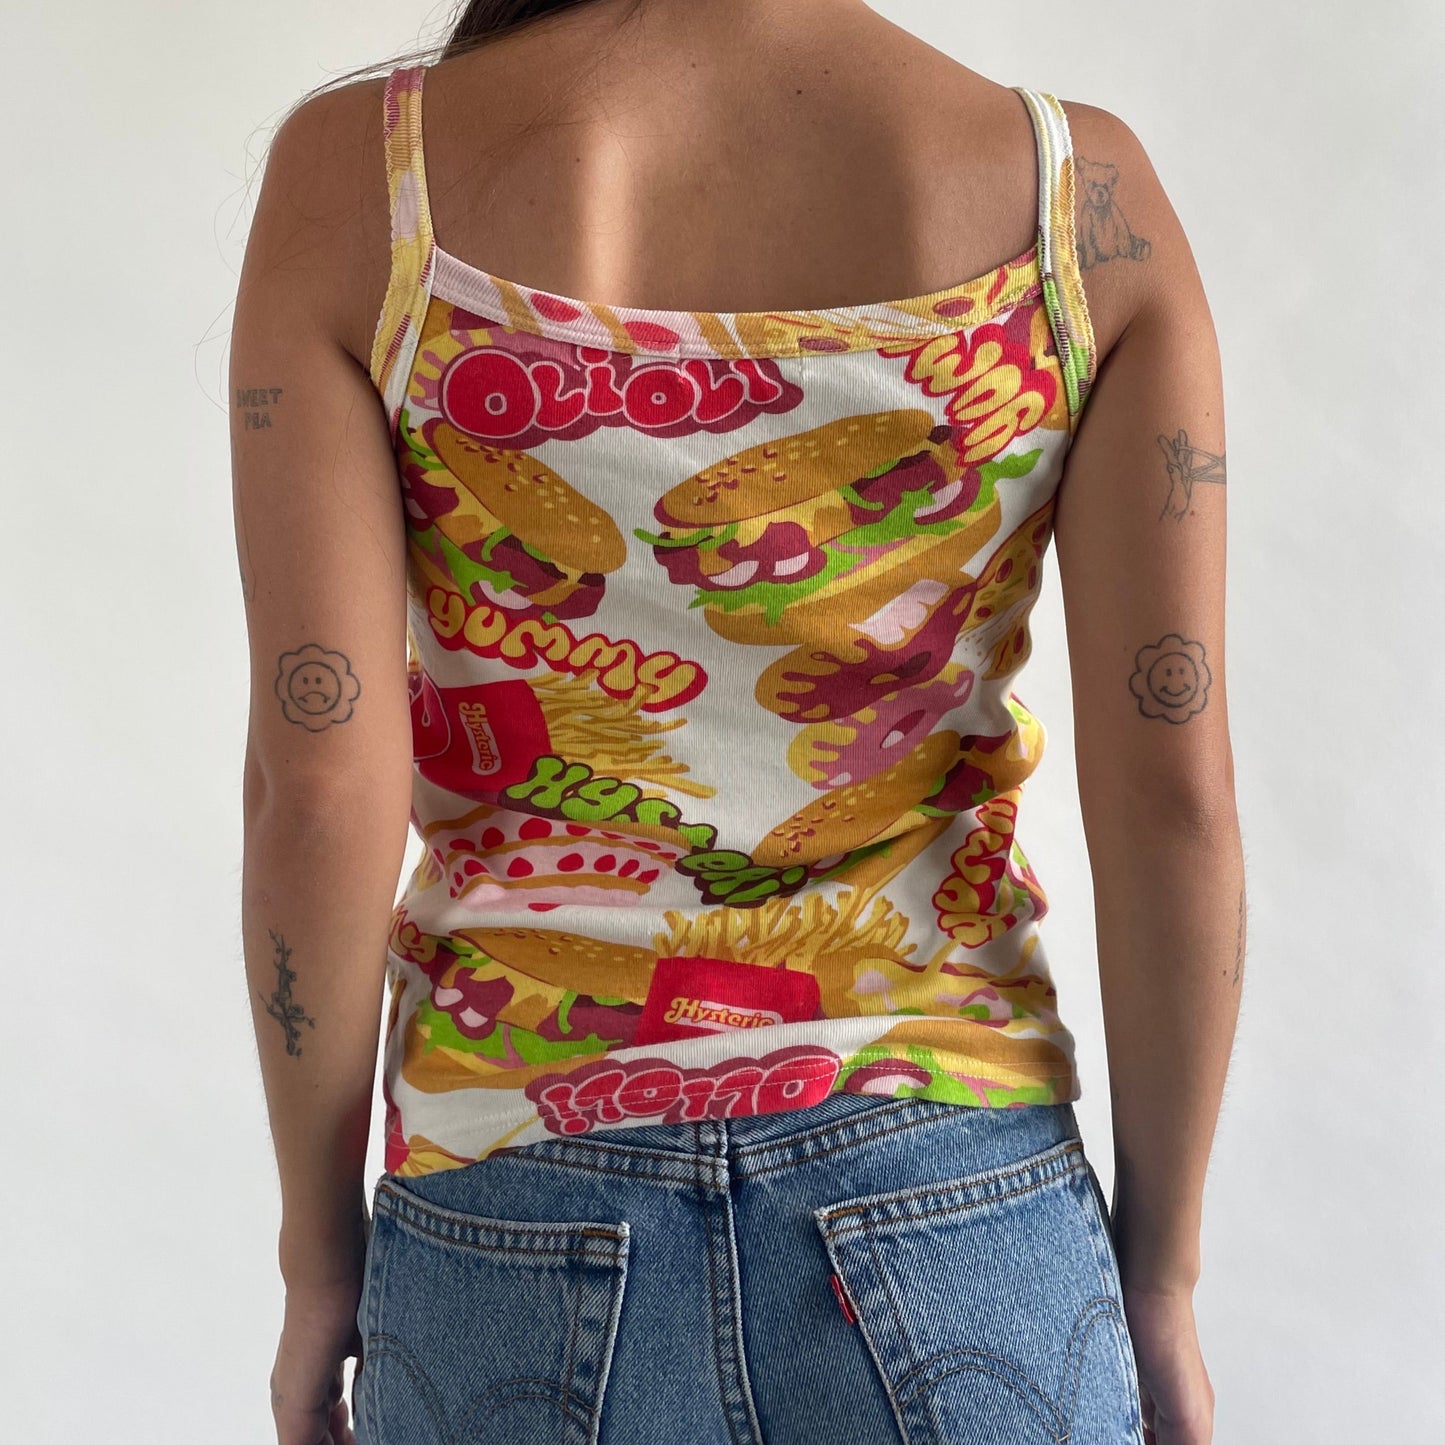 hysteric glamour junk food tank